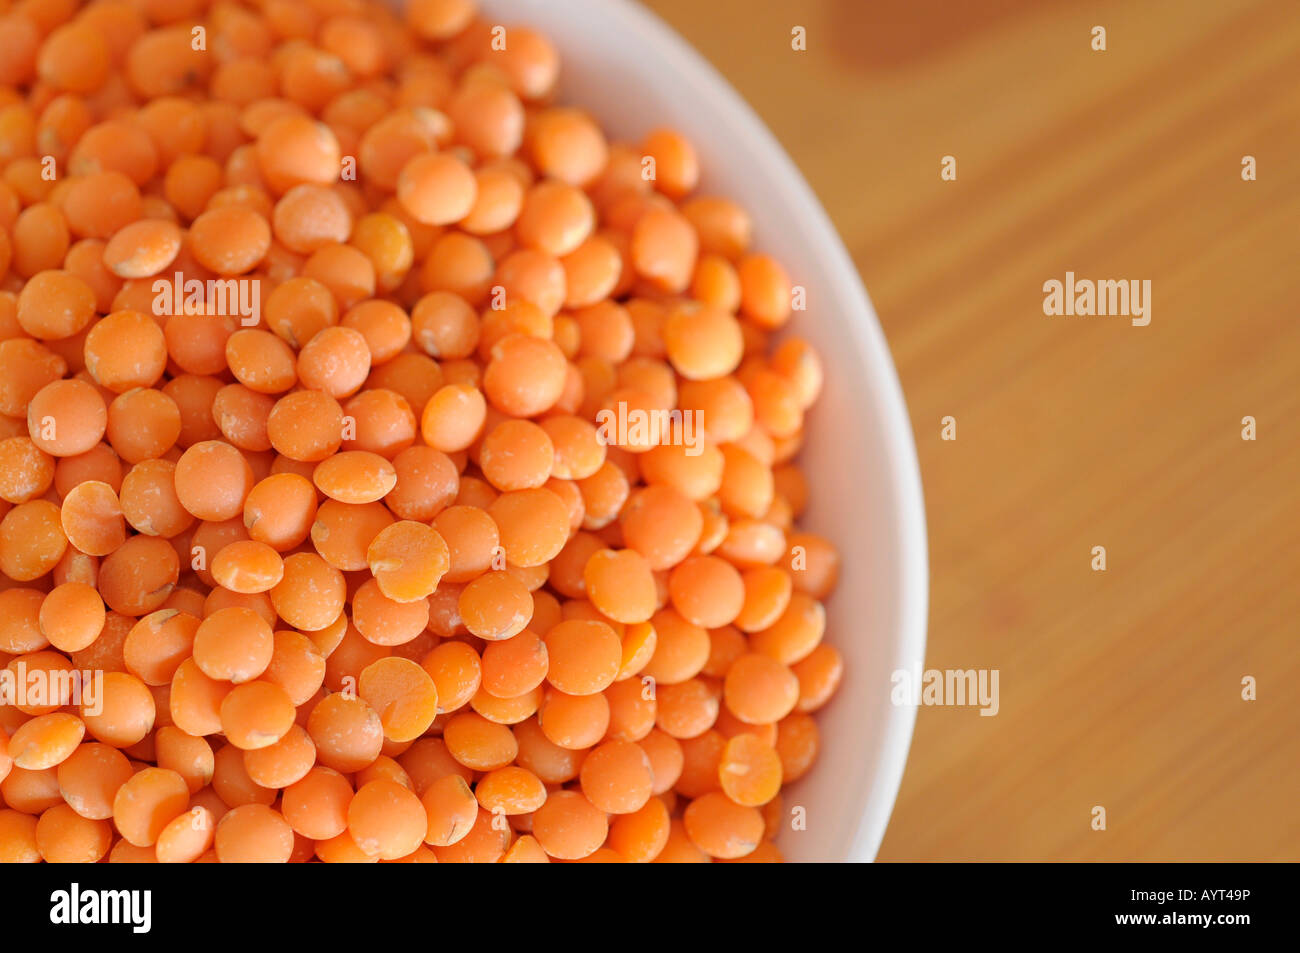 Red lentils (Lens esculenta) in a bowl Stock Photo - Alamy